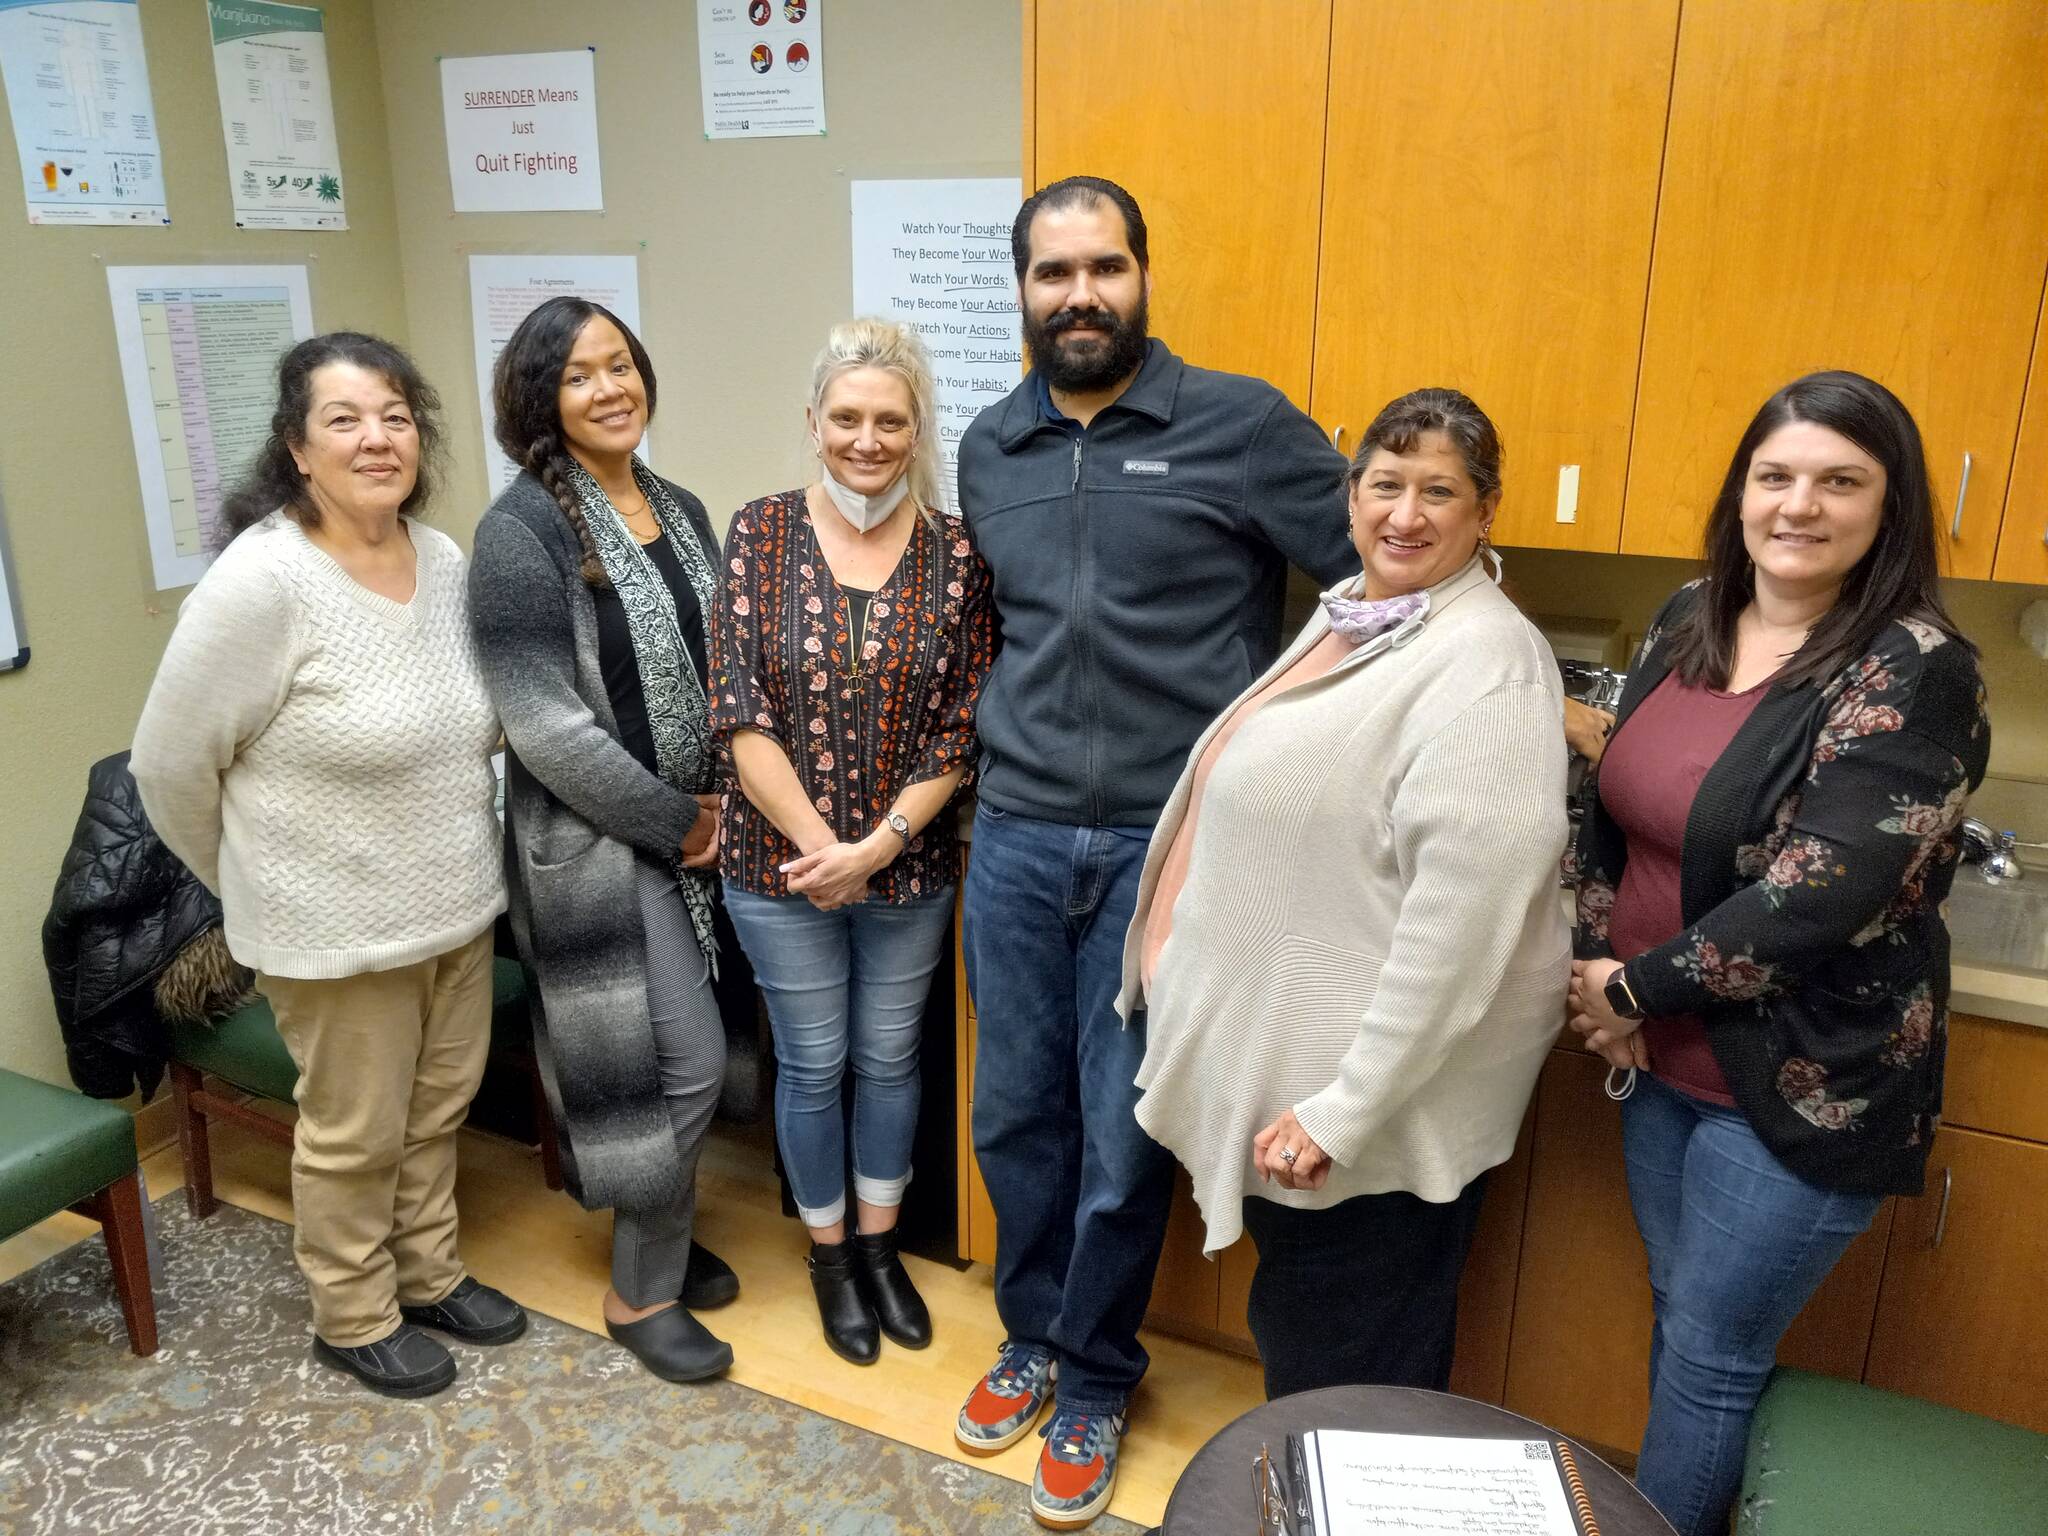 Staff at Walk to Freedom are Maggie Baldridge, intern Karen Haggins, drug and alcohol counselor Allyson Noel, counselor Michael Preston, owner and founder Lynn Dalsing and intern Shayna Williamson. Photo Robert Whale/Auburn Reporter